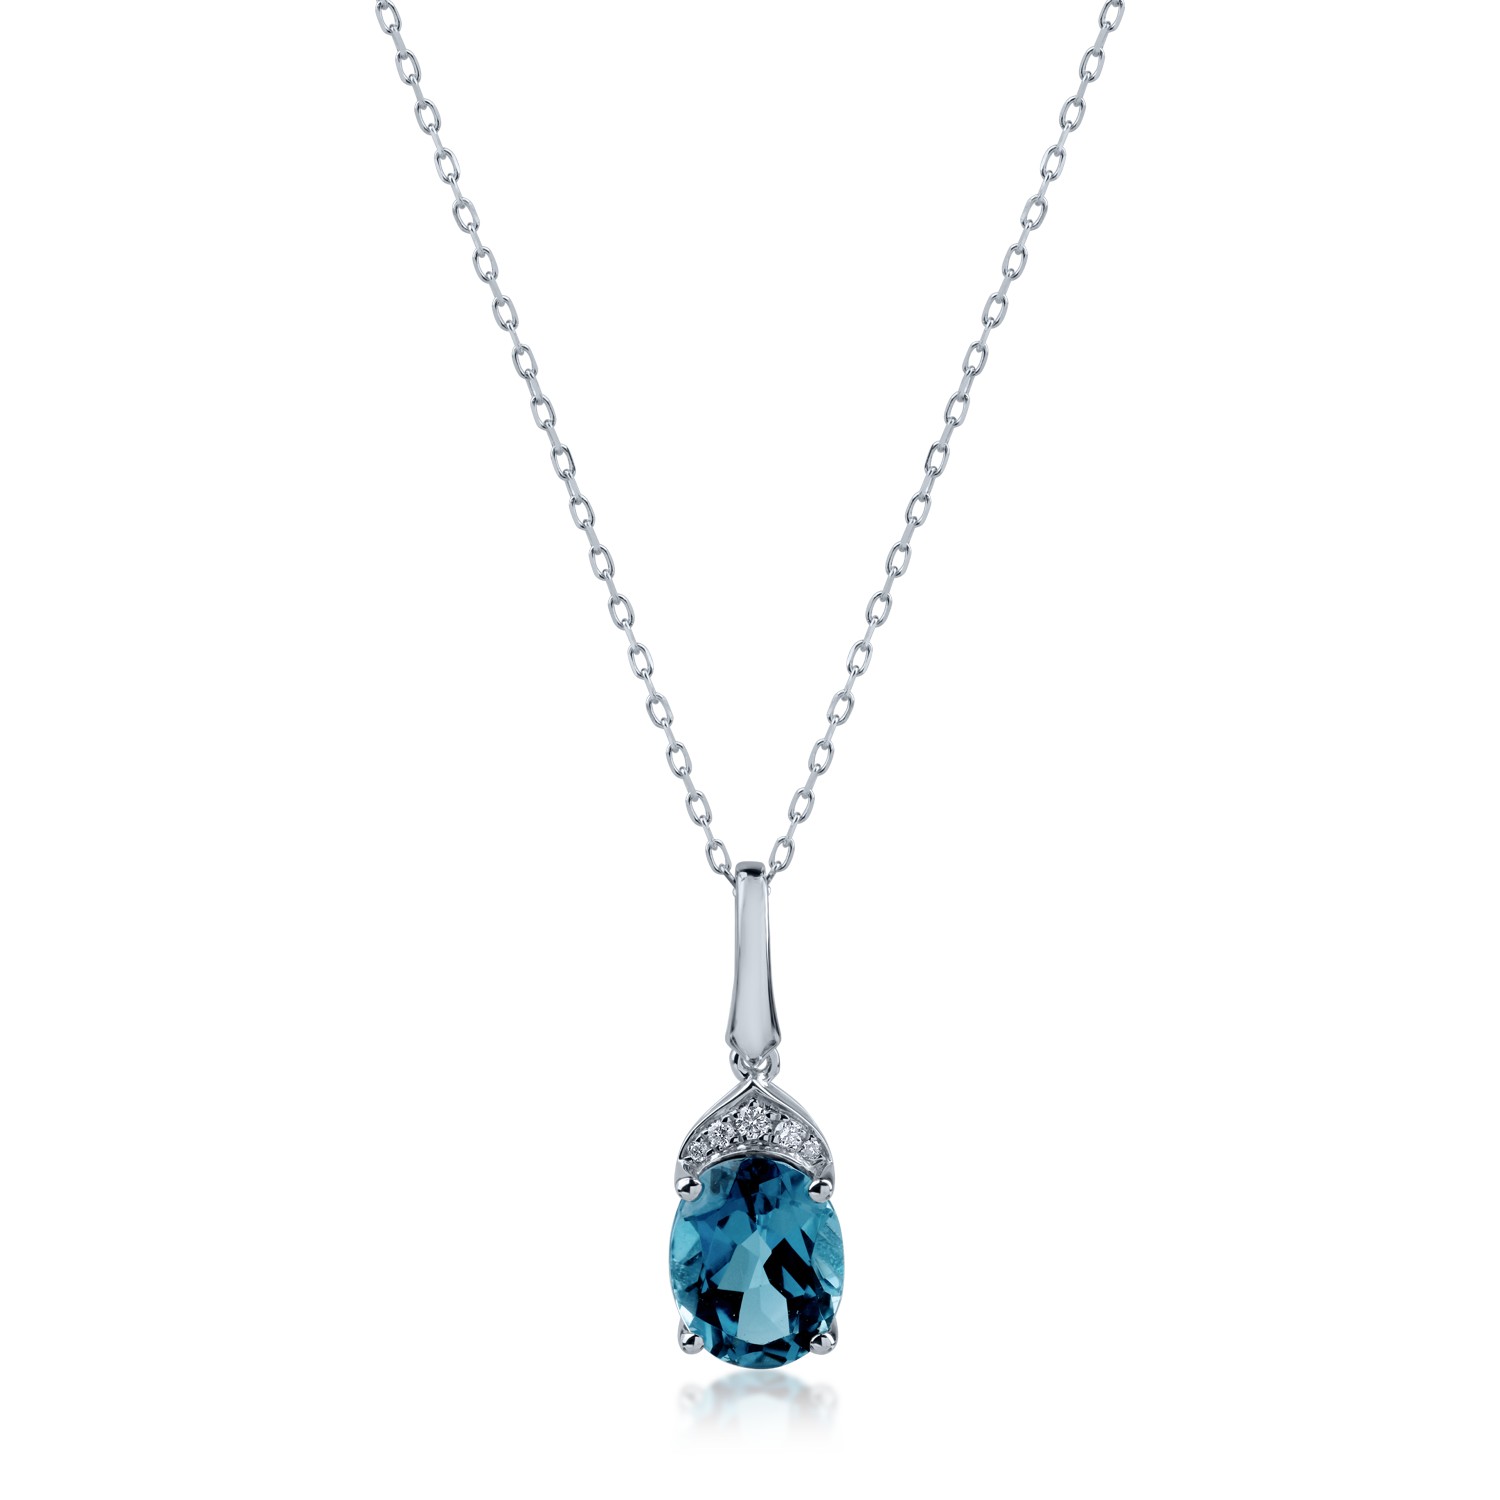 White gold pendant necklace with 2.2ct london blue topaz and 0.03ct diamonds